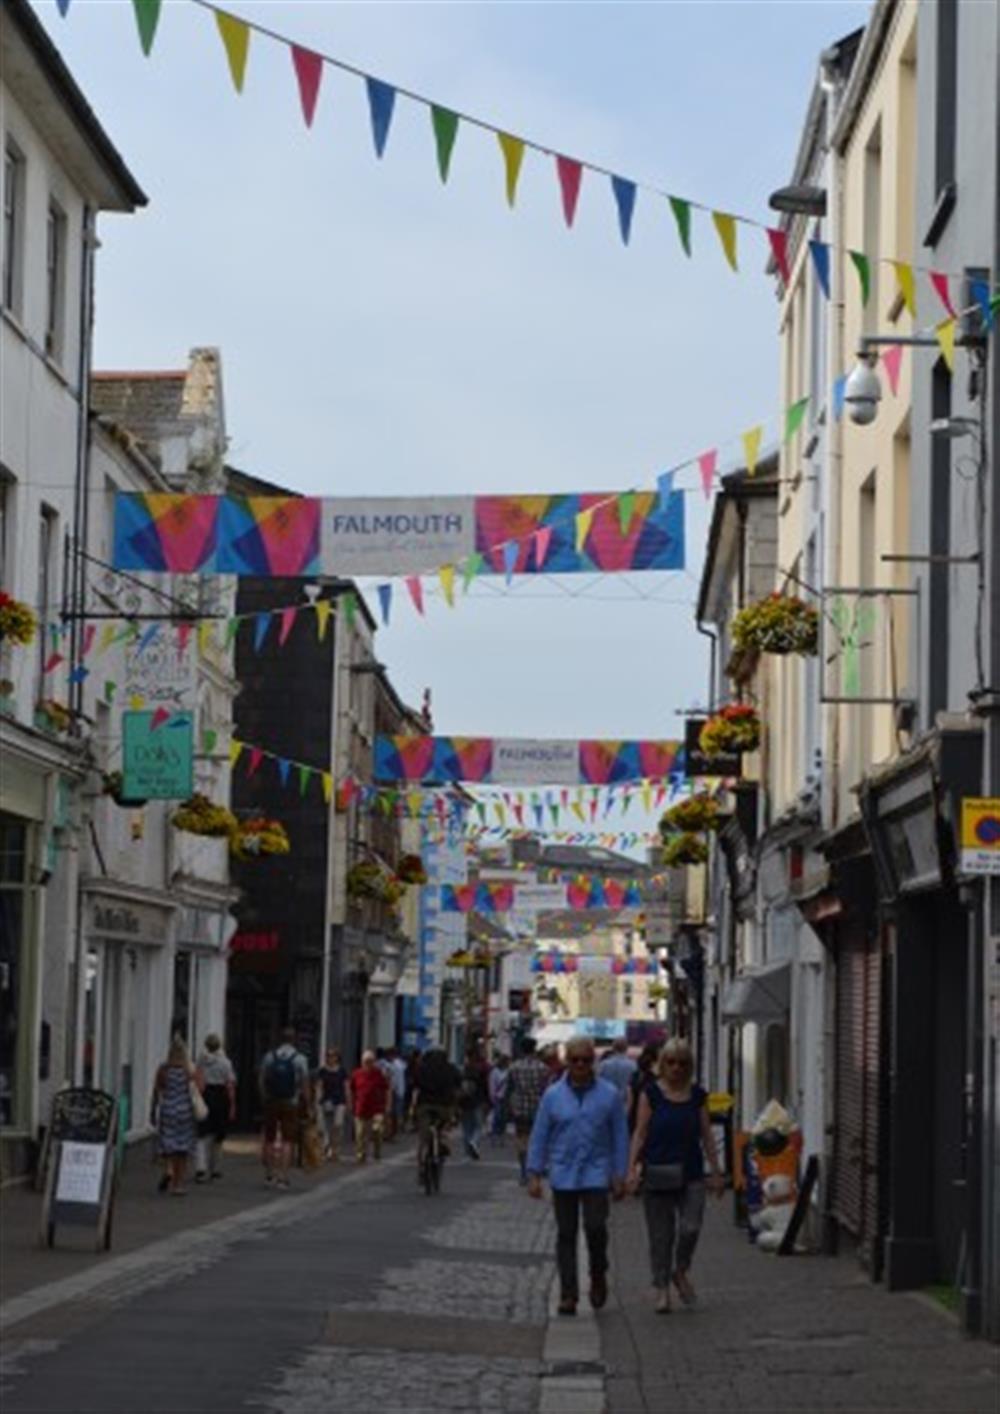 Falmouth town has an array of shops, plus a range of restaurants, cafes and art galleries. at Demelza 1 in Helford Passage